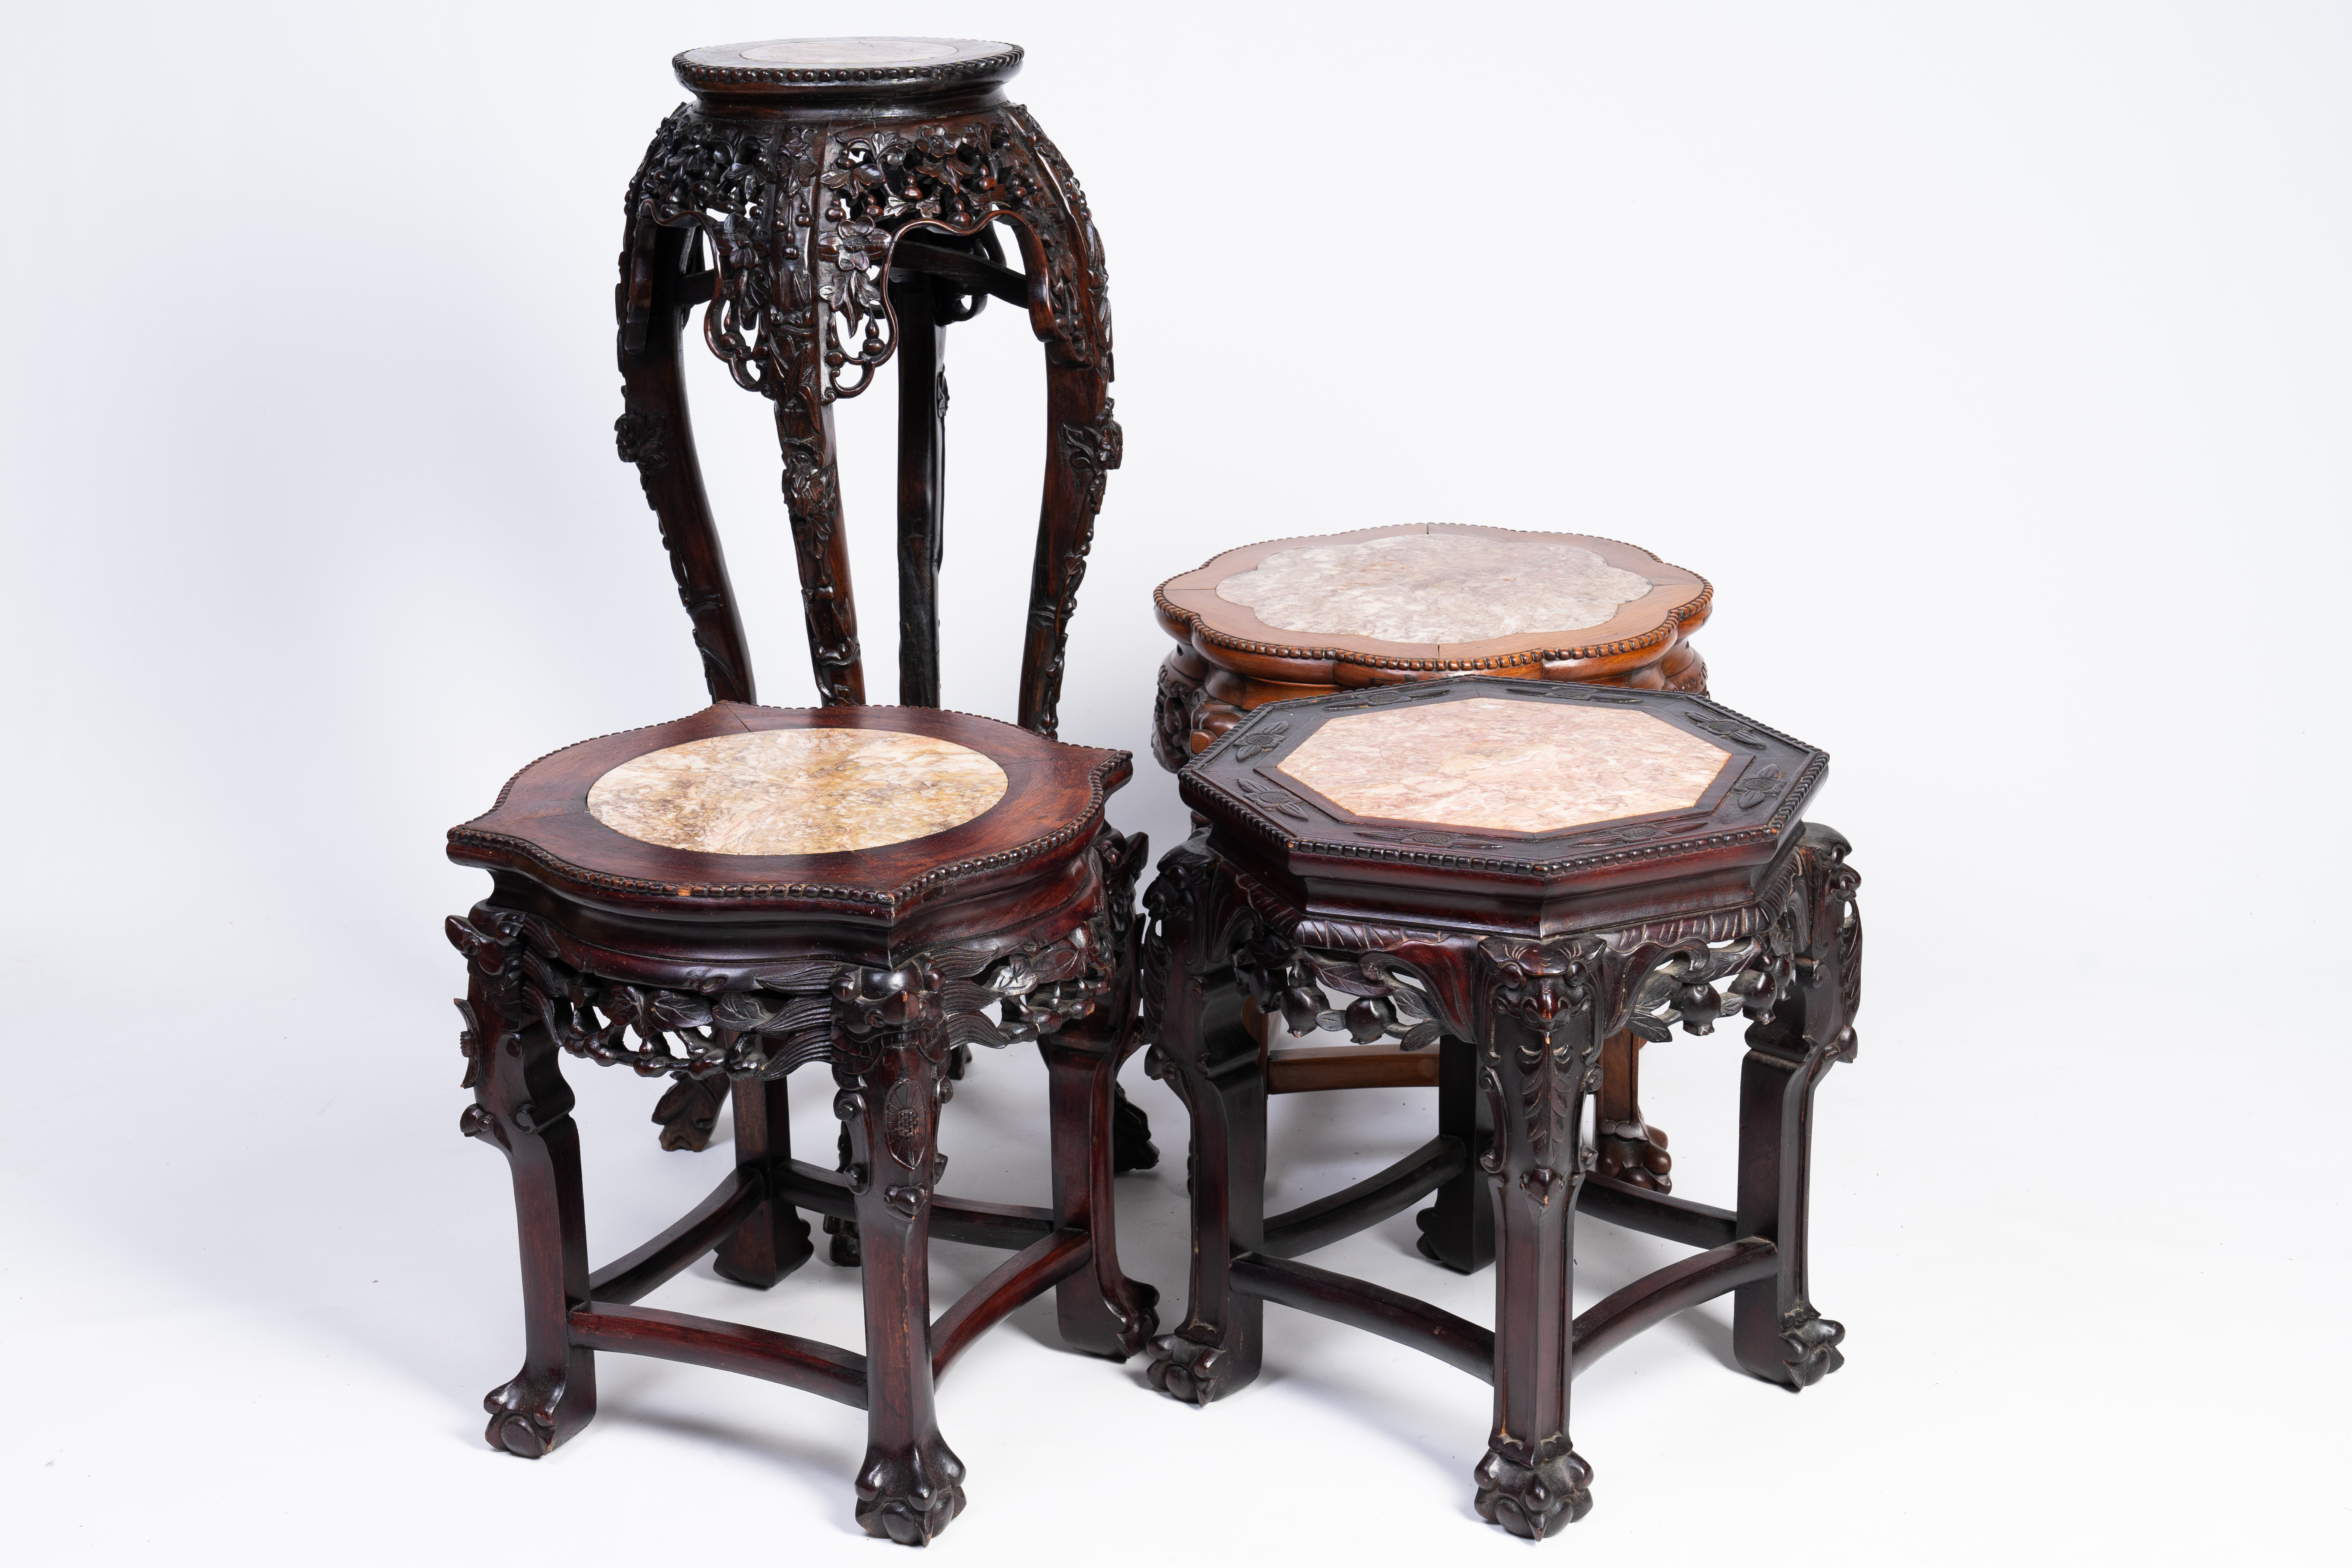 Four Chinese reticulated hardwood stands with marble tops, 20th C.